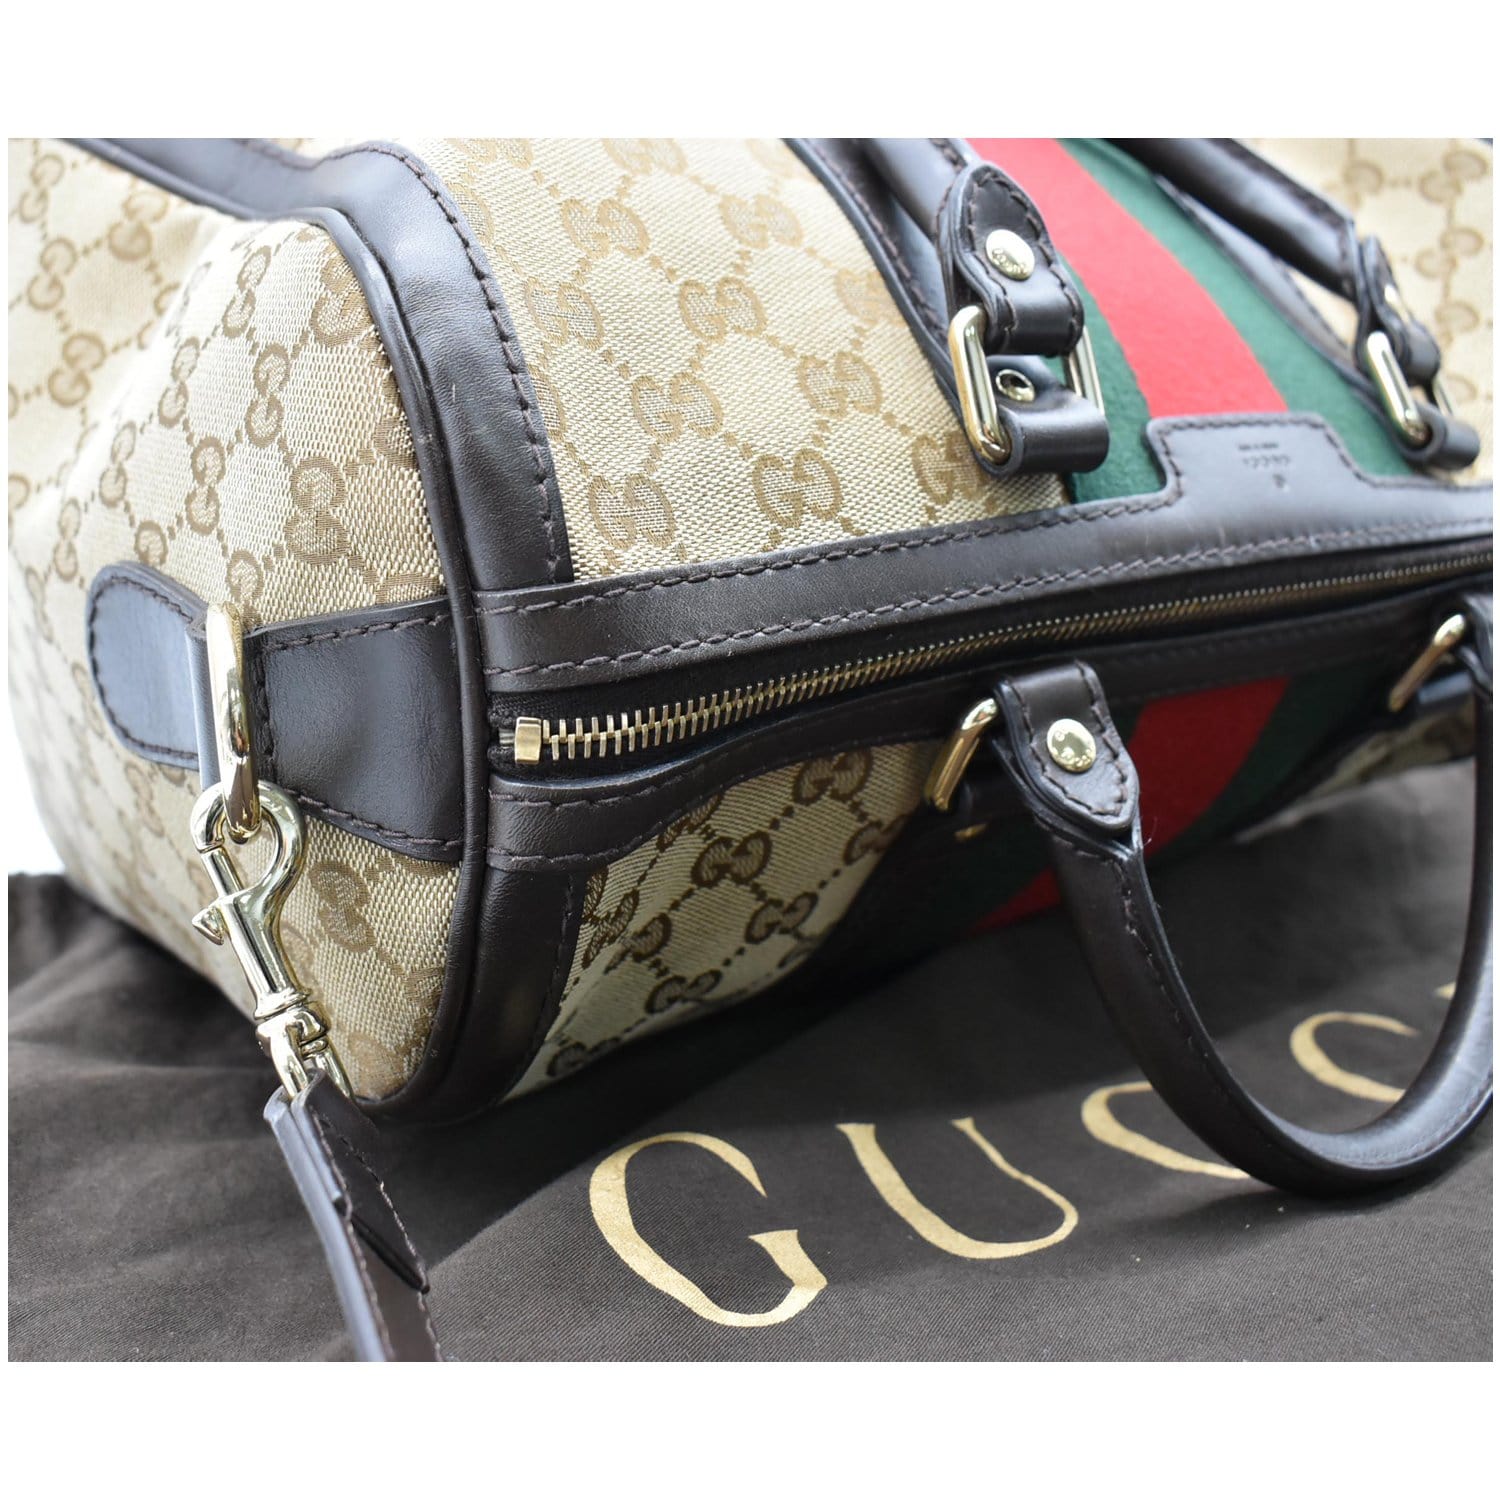 Found Vintage Louis Vuitton and (maybe?) Vintage Gucci at a